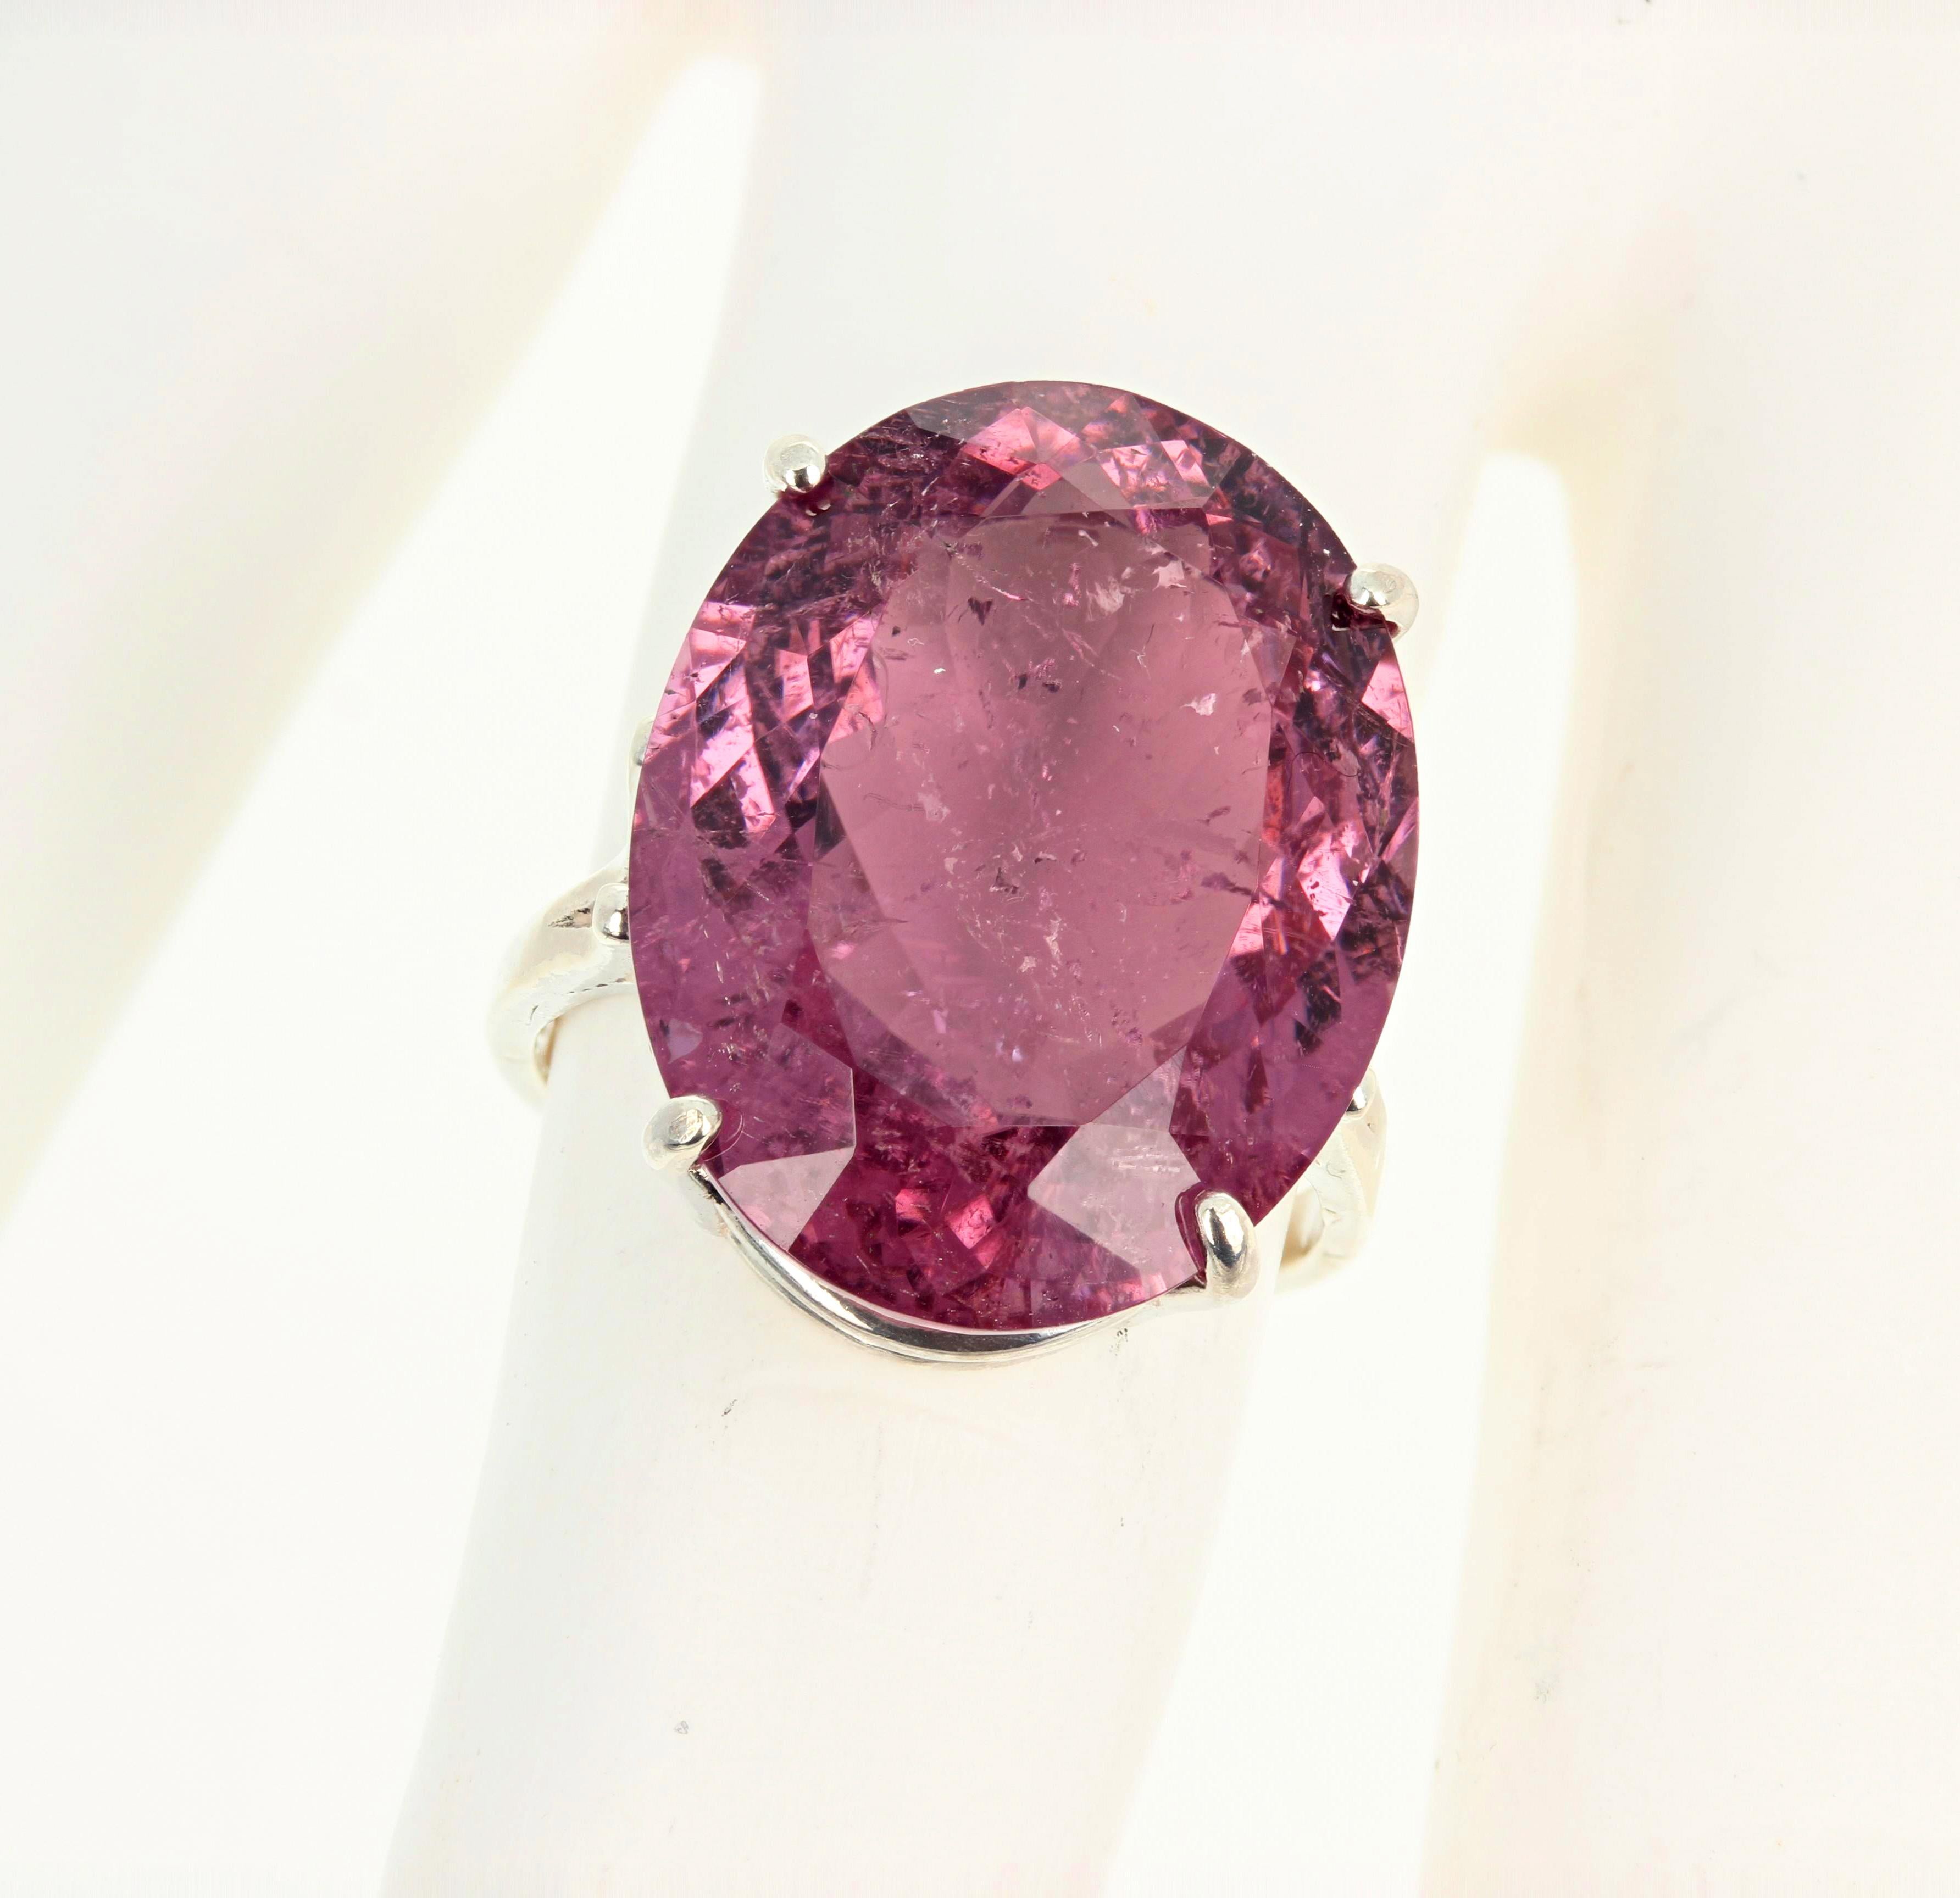 Spectacular optical effects in this unique gorgeous huge 20.04 carat purplypinky natural Tourmaline ring exhibit sparkling silver reflections and pink highlights.  The Gemstone is 20 mm x 16 mm and is set in a sterling silver ring size 7 (sizable